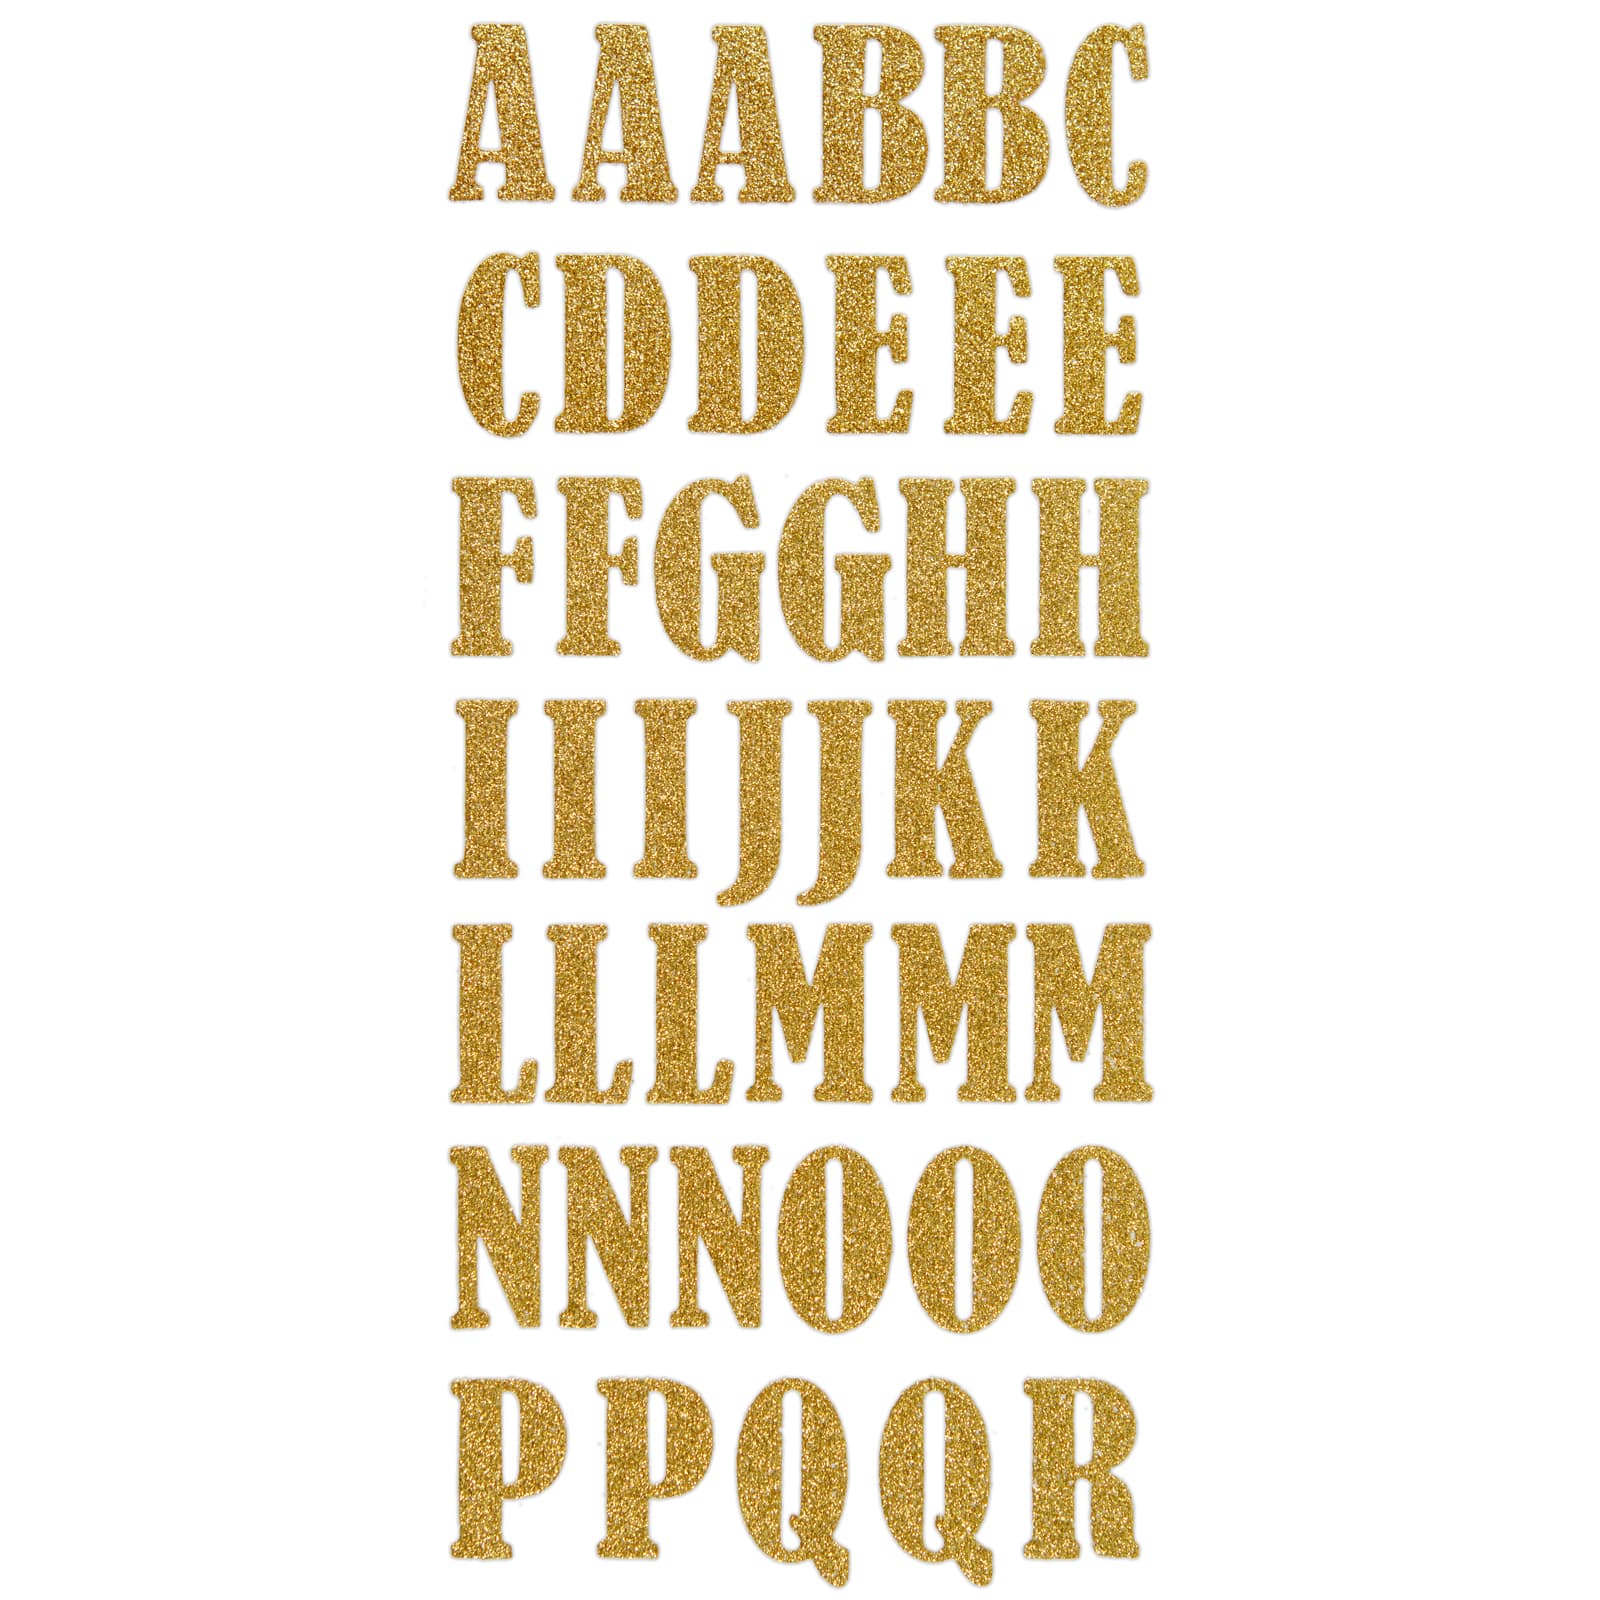 Homeford Glitter Cursive Alphabet Letters Stickers, 1-Inch, 50-Count (Gold)